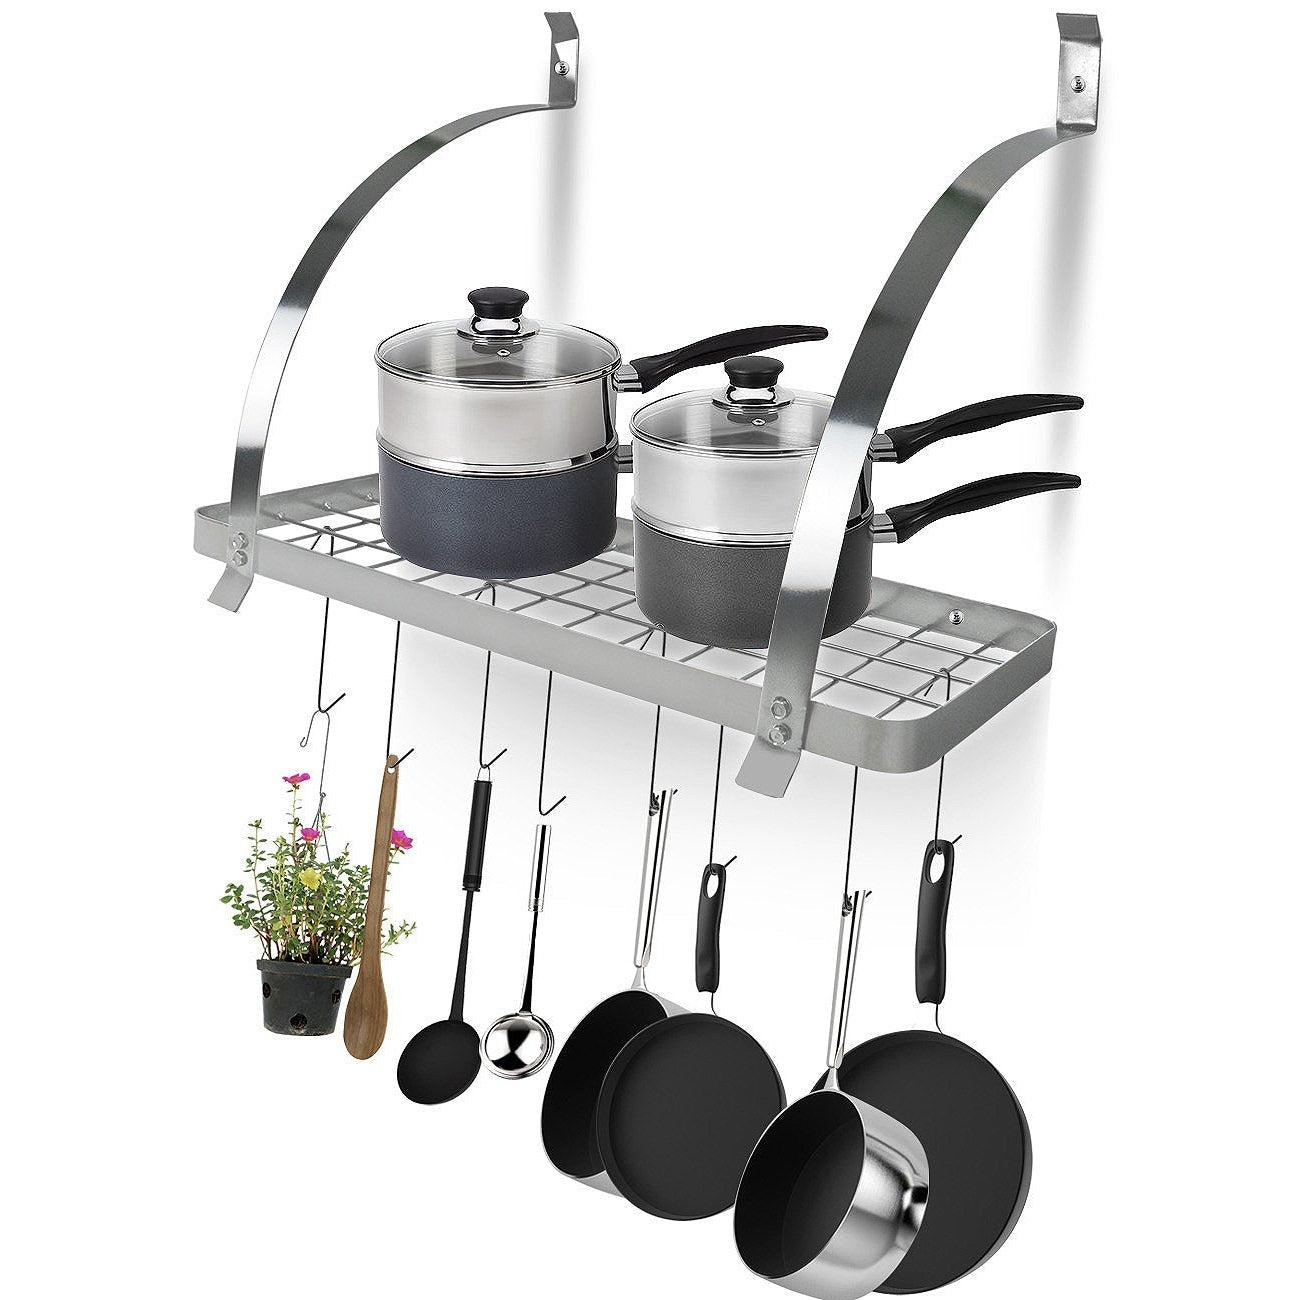 Wall Mounted Pot Rack with Hooks